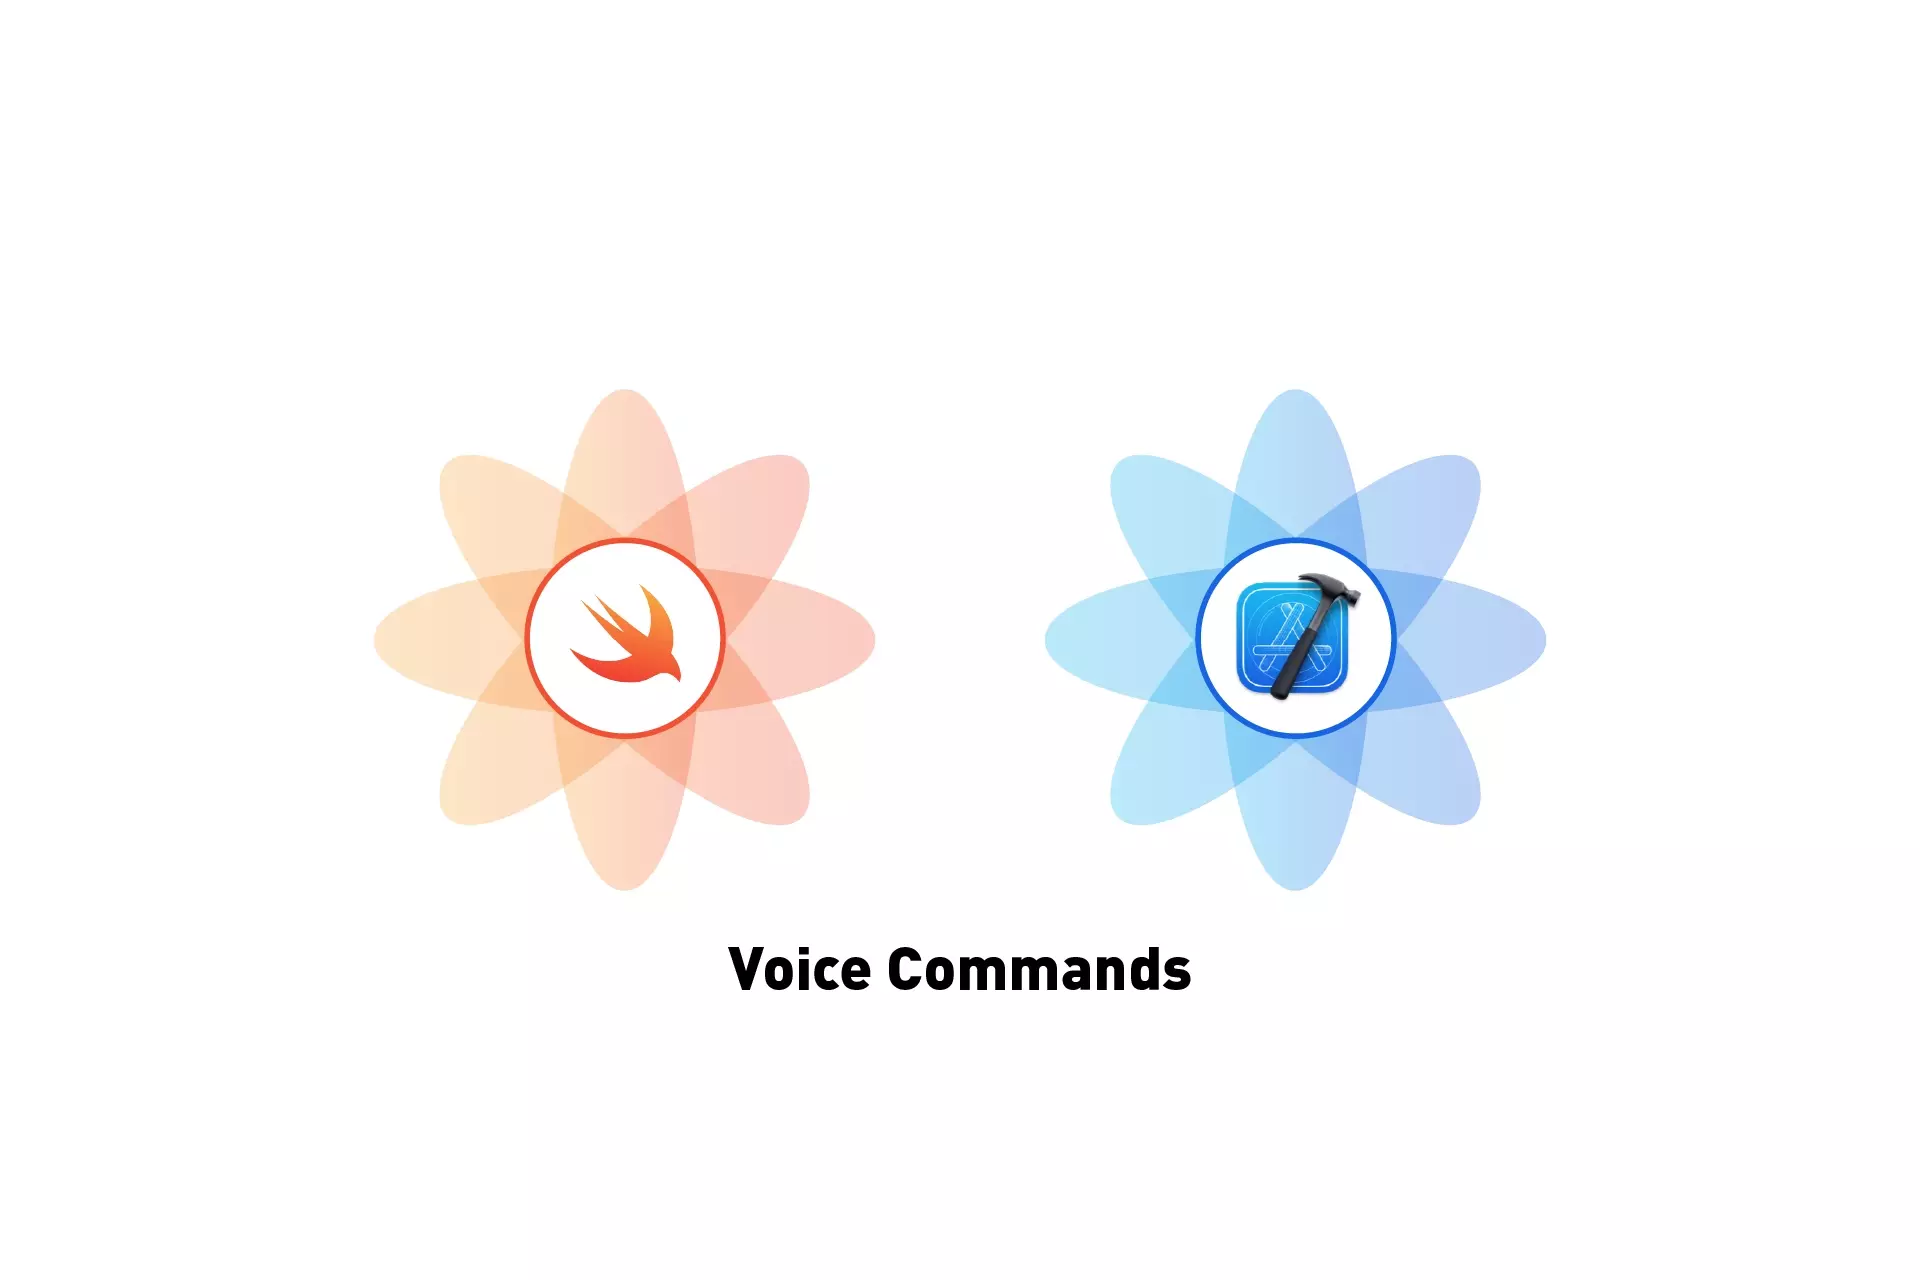 Two flowers that represent Swift and Xcode side by side. Beneath them sits the text "Voice Commands."